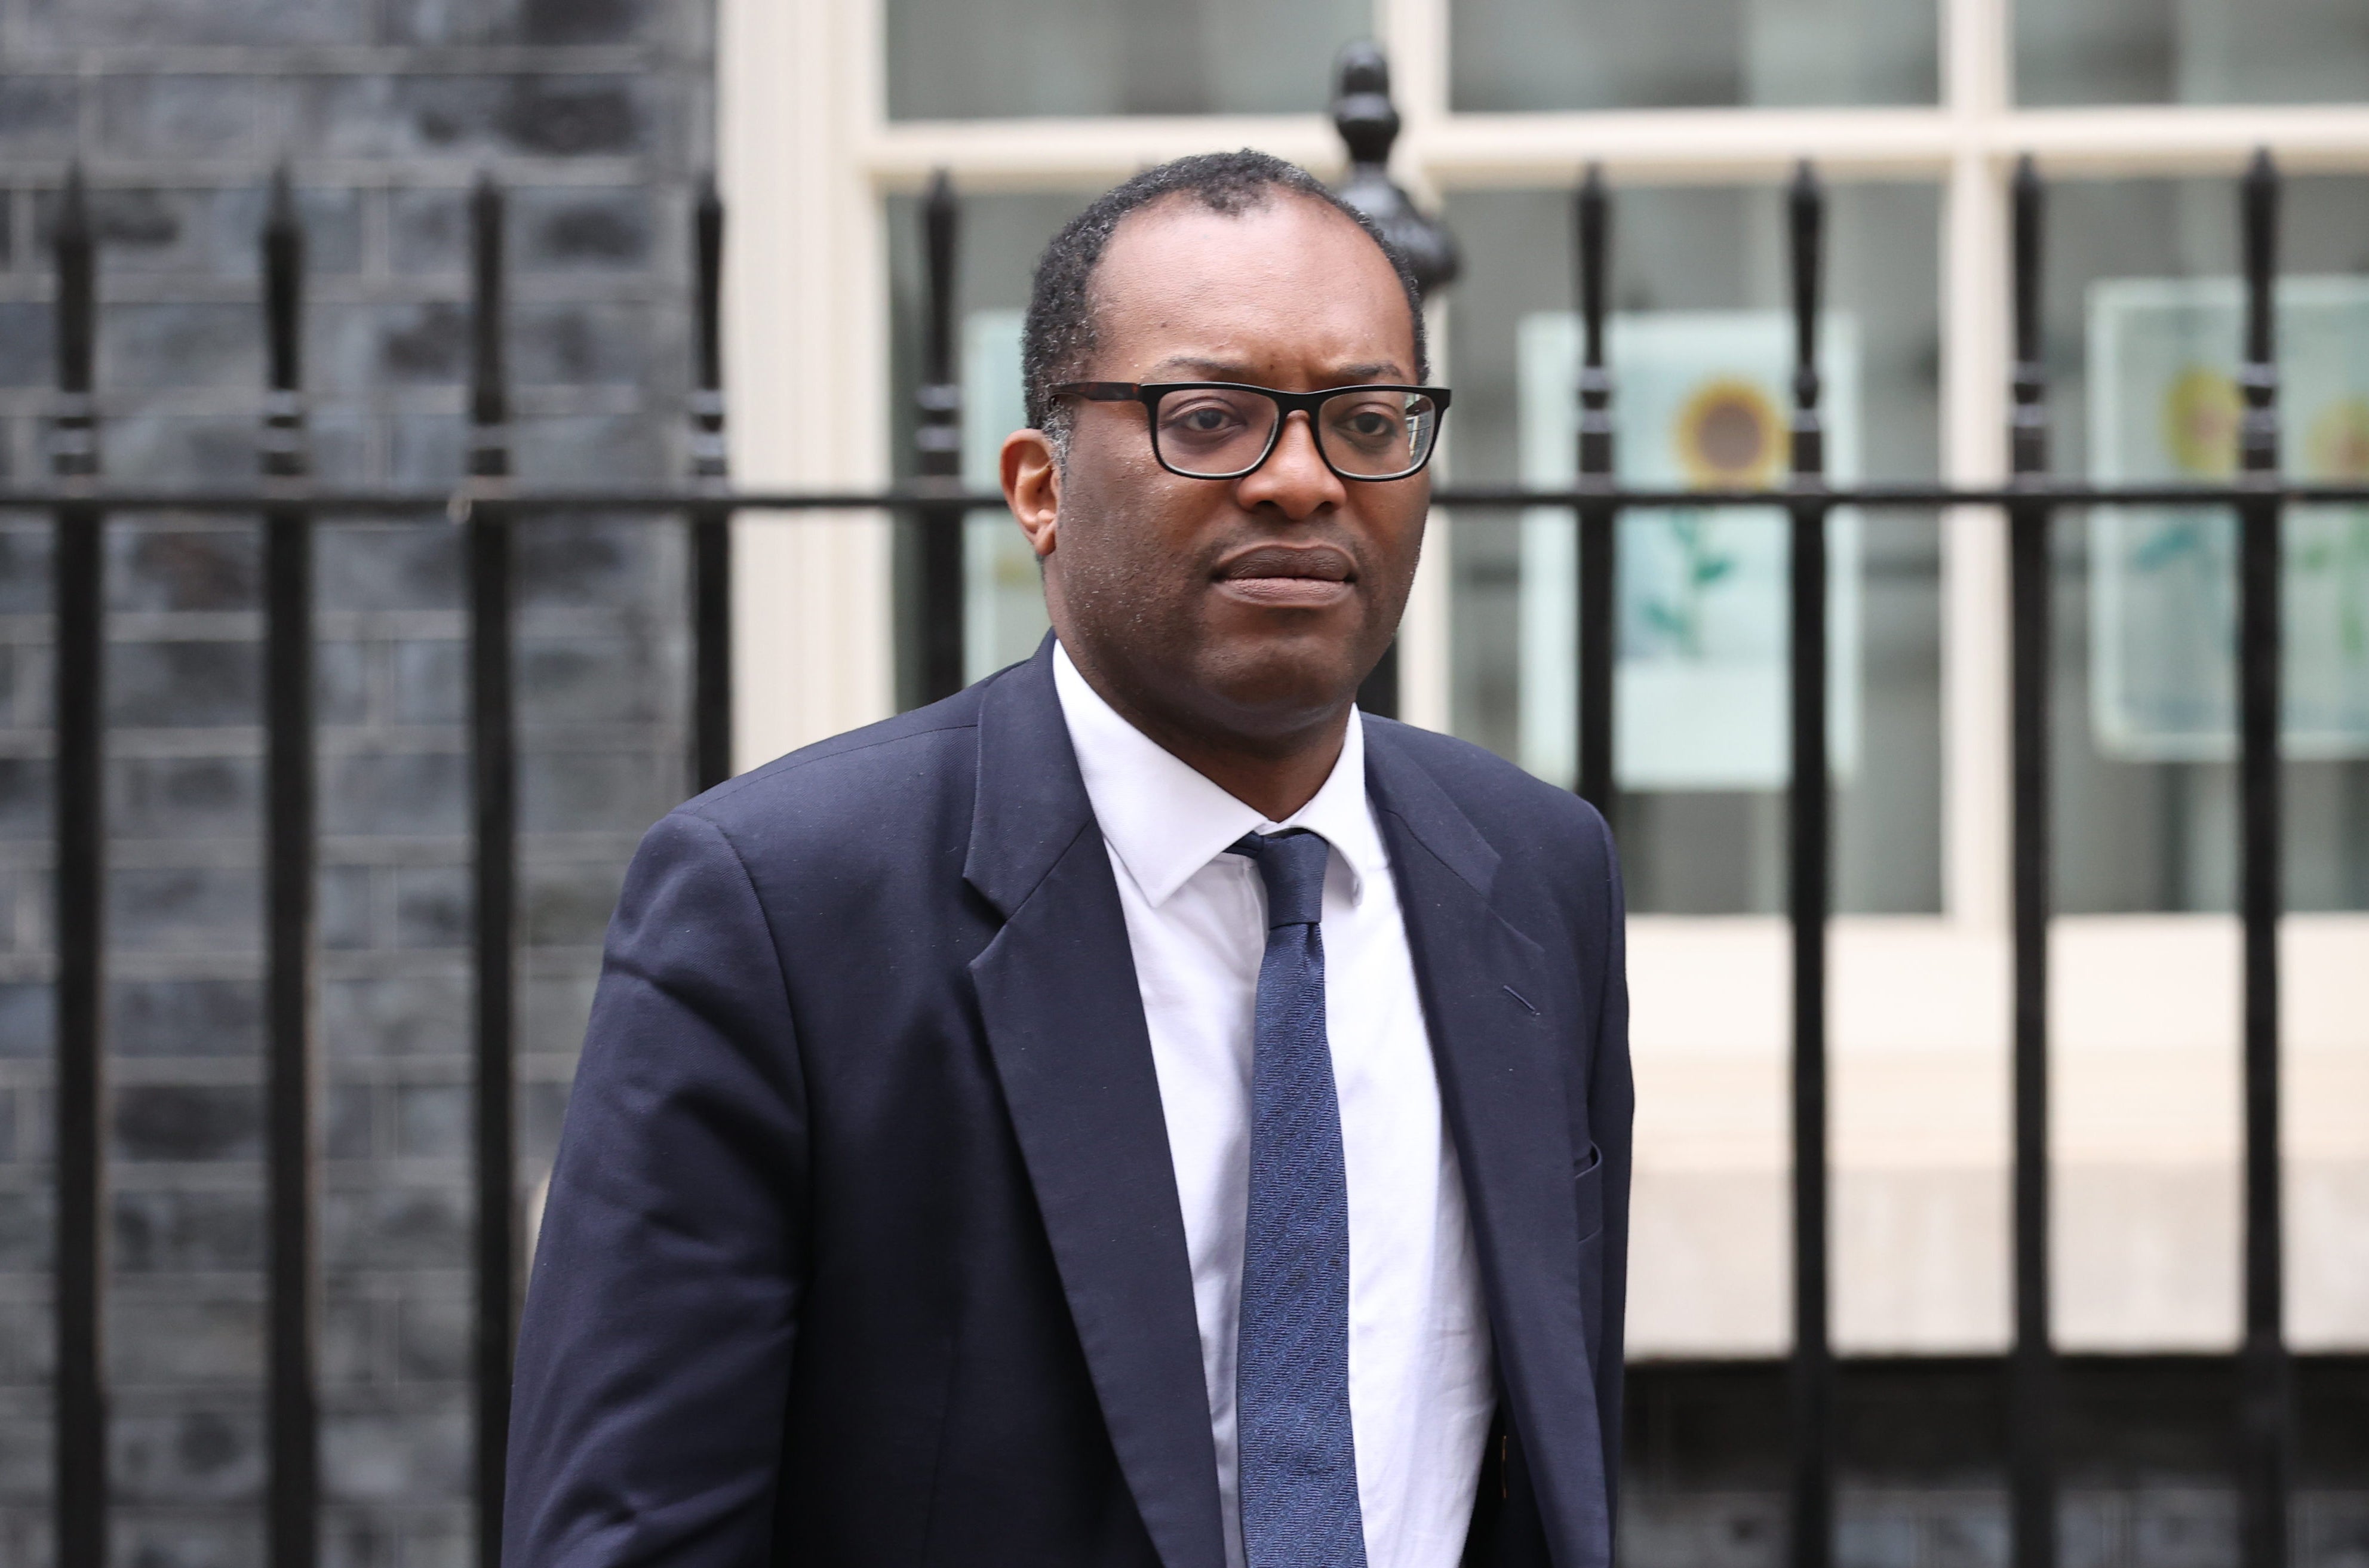 Kwasi Kwarteng, the secretary of state for business, energy and industrial strategy